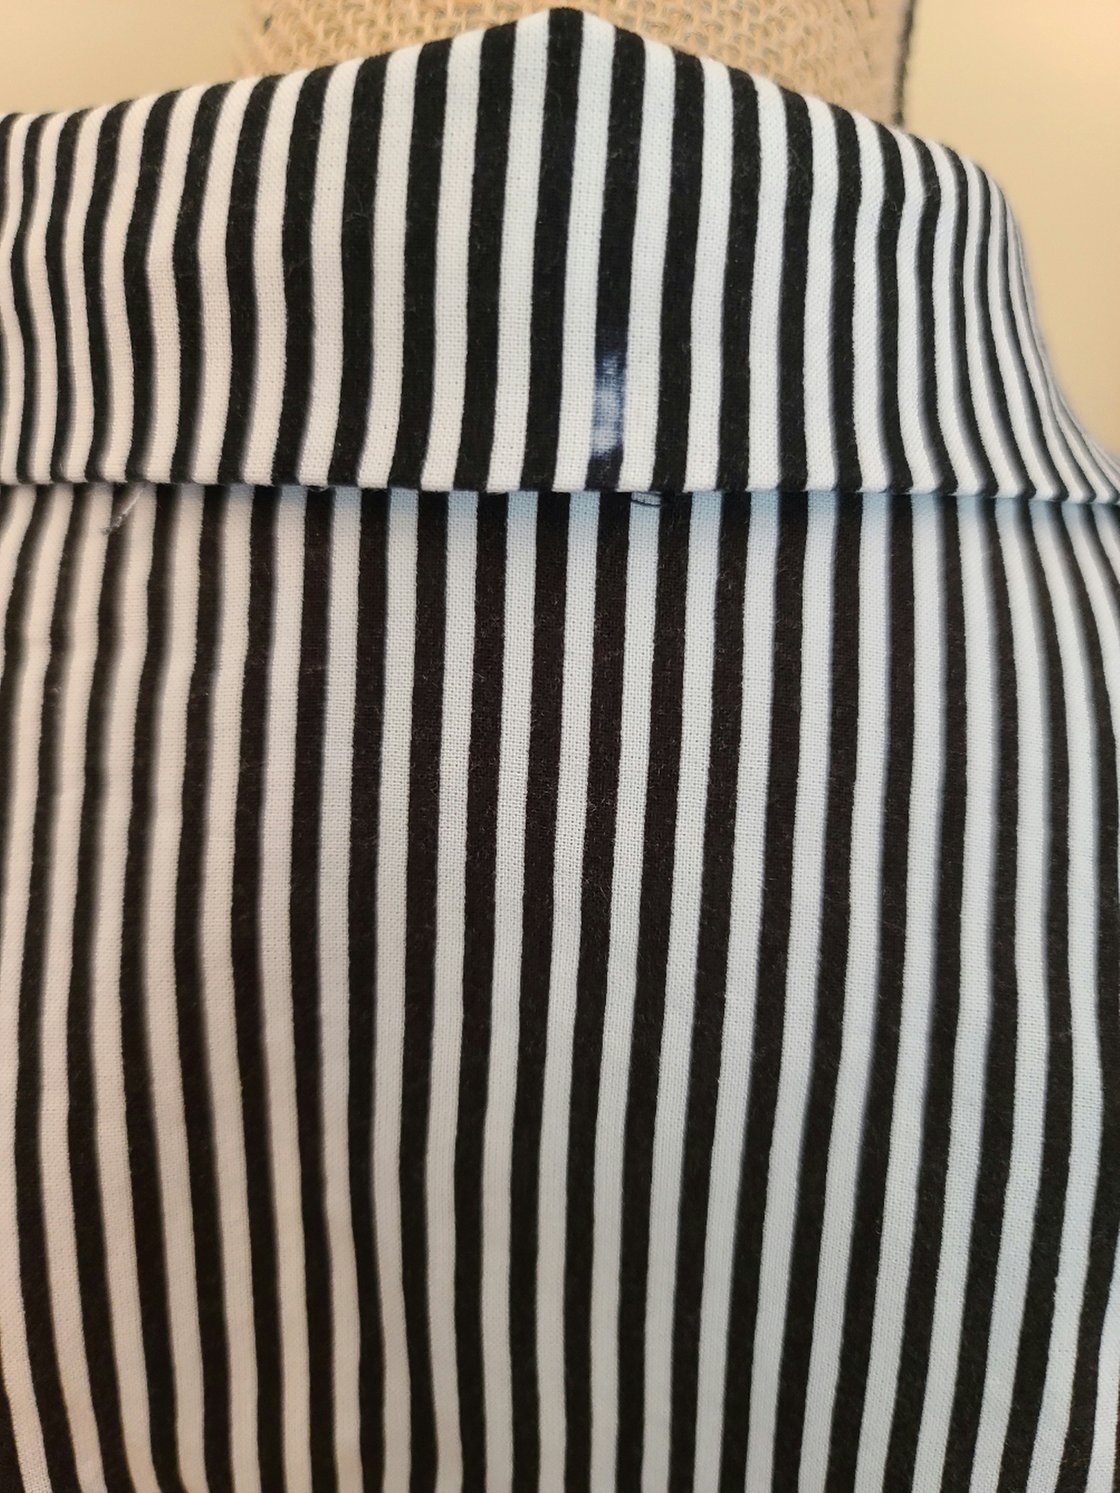 Image of Striped Sleevless Top